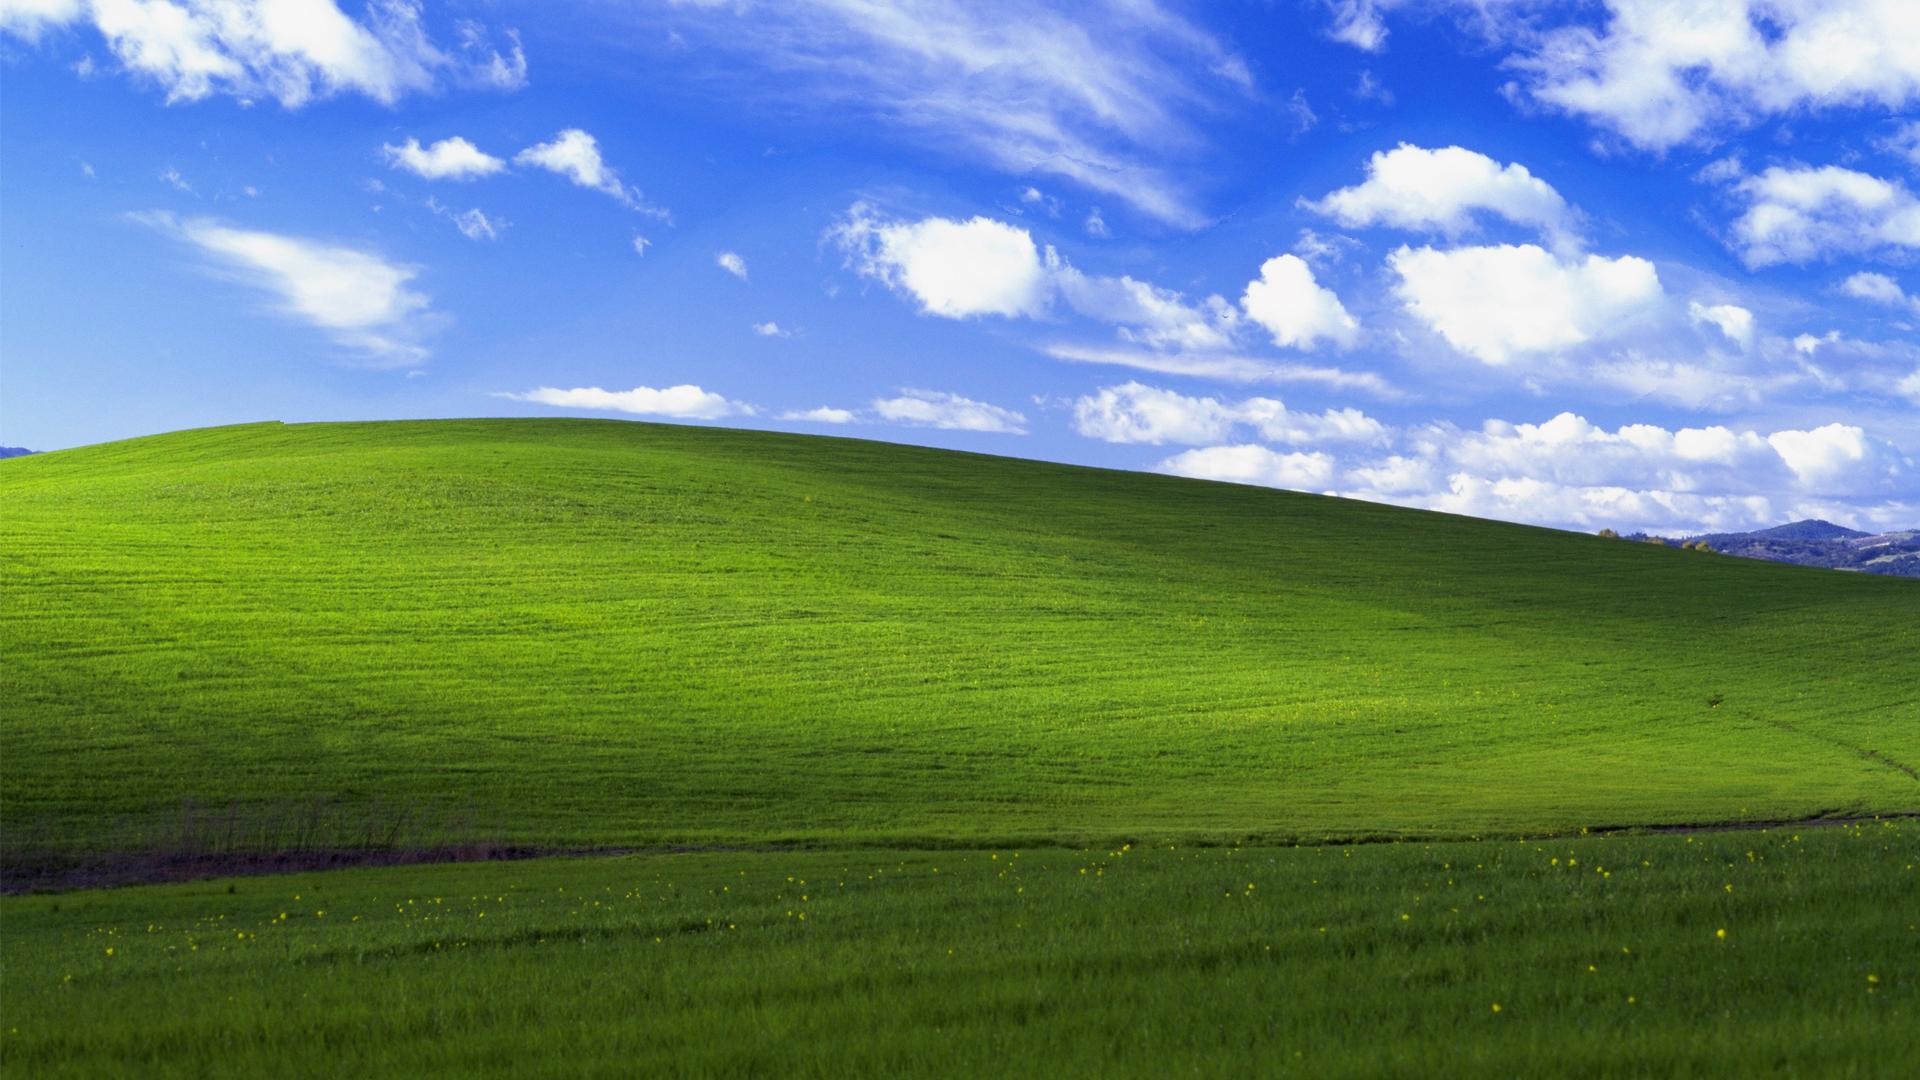 Colorful Windows Xp Backgrounds Widescreen - Bliss By Charles O Rear , HD Wallpaper & Backgrounds